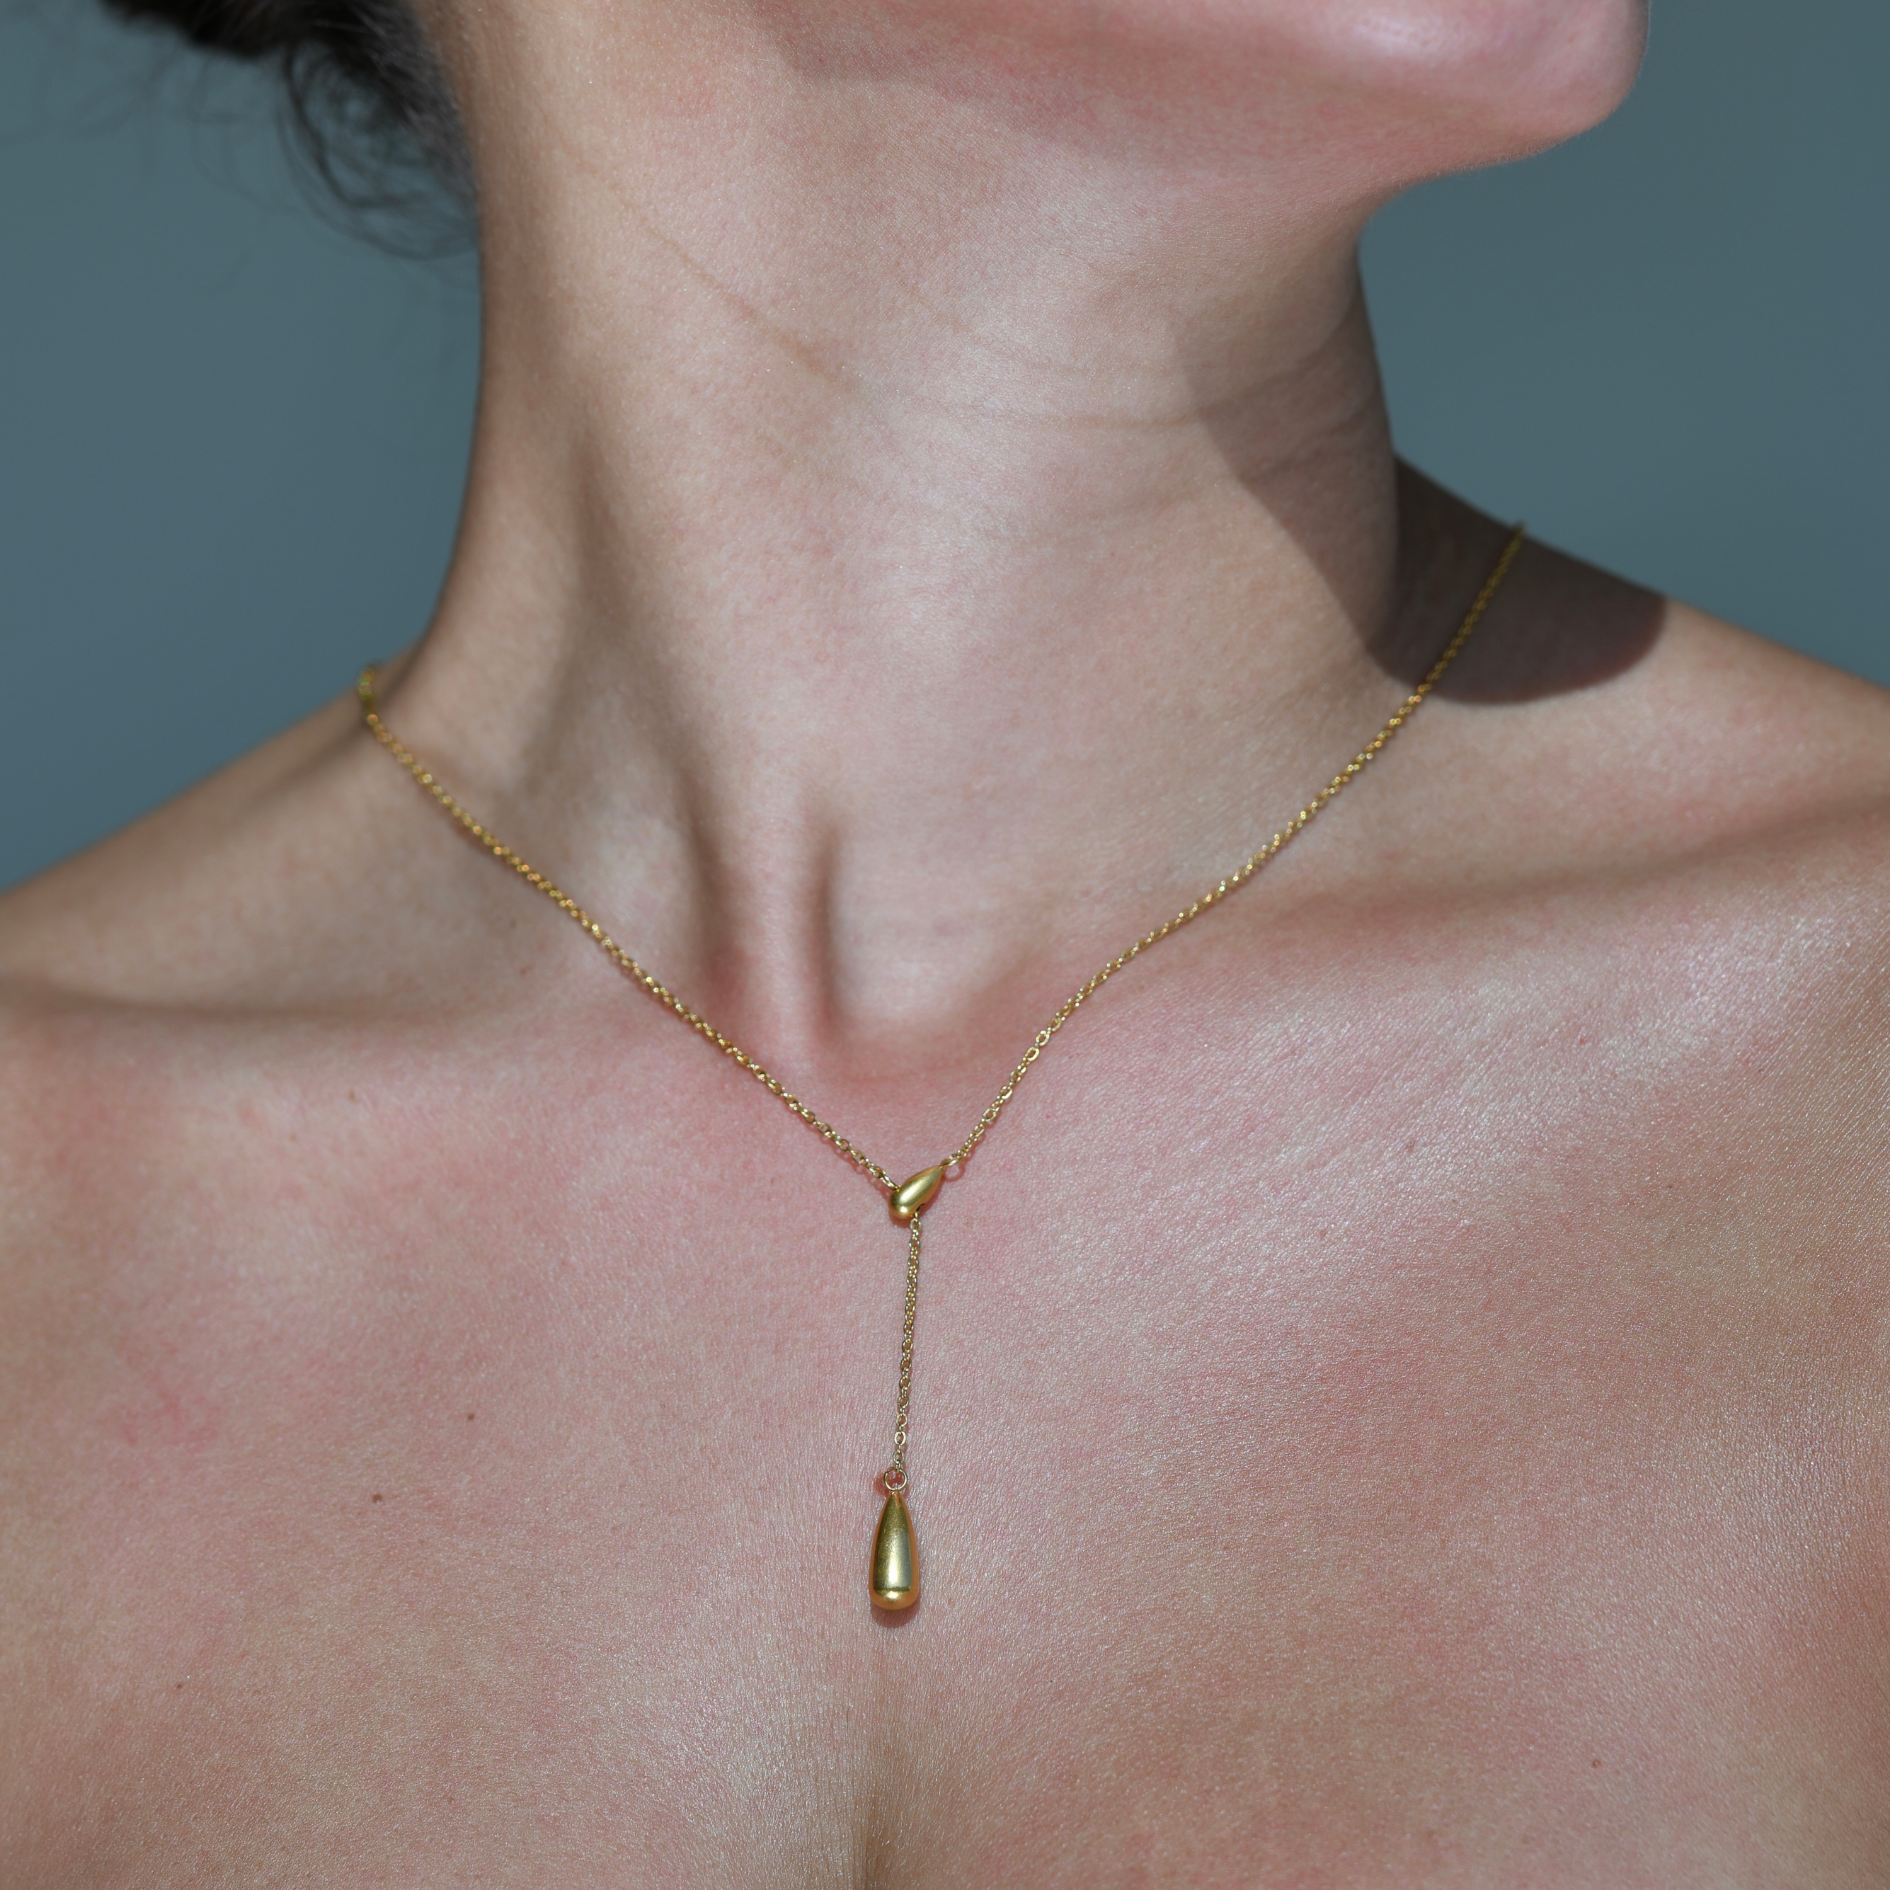 Elegant Slim Gold Chain with a Waterdrop pendant who is movable making the chain like a choker or longer necklace by reducing the drop distance of it. The water drop is attached on a smaller diagonal waterdrop which has a hole in the middle of it where the chain is versatile becoming longer or shorter.